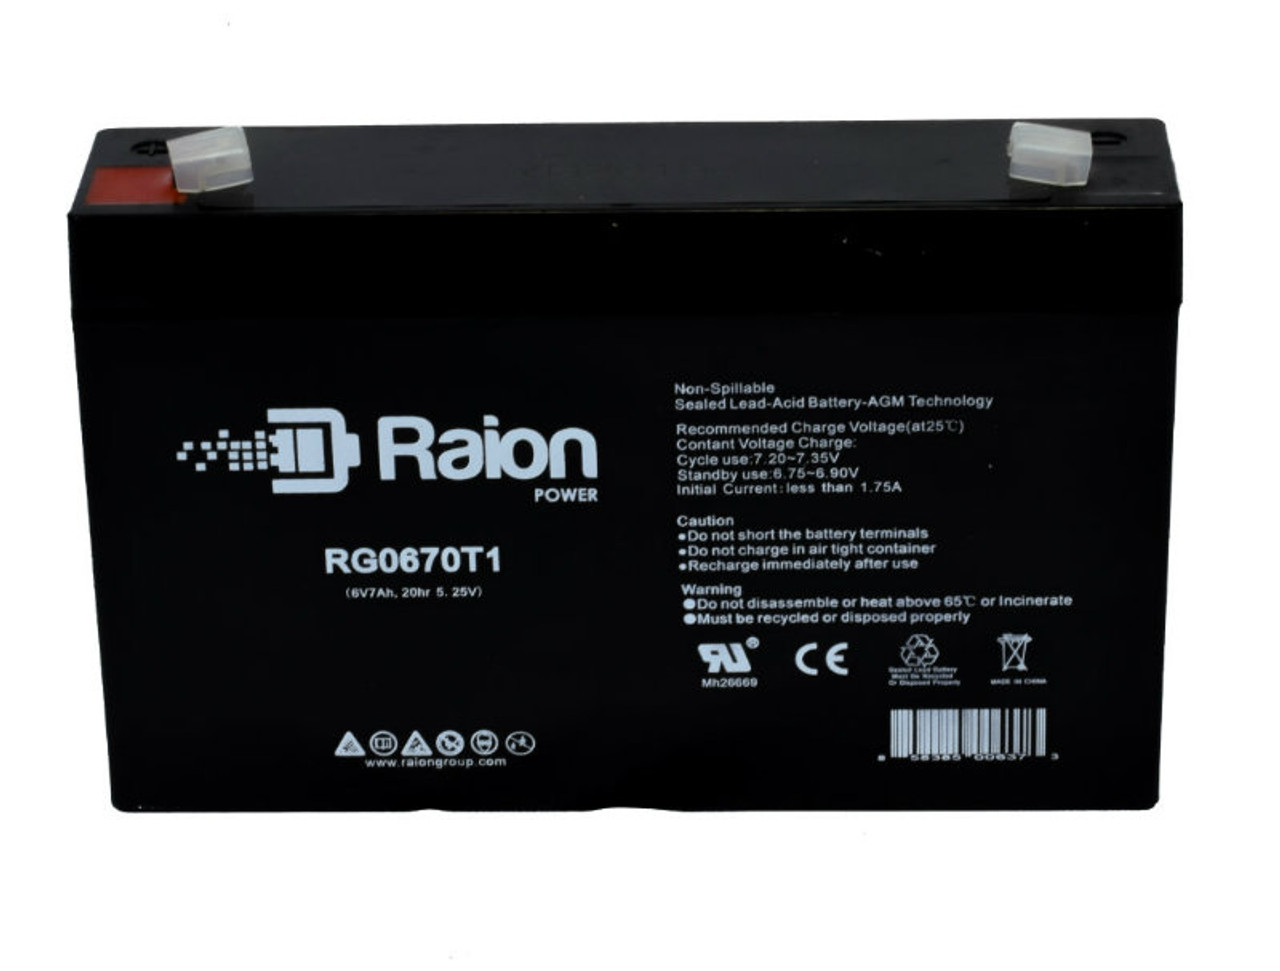 Raion Power RG0670T1 Replacement Battery Cartridge for Dual-Lite CVT3GB3I